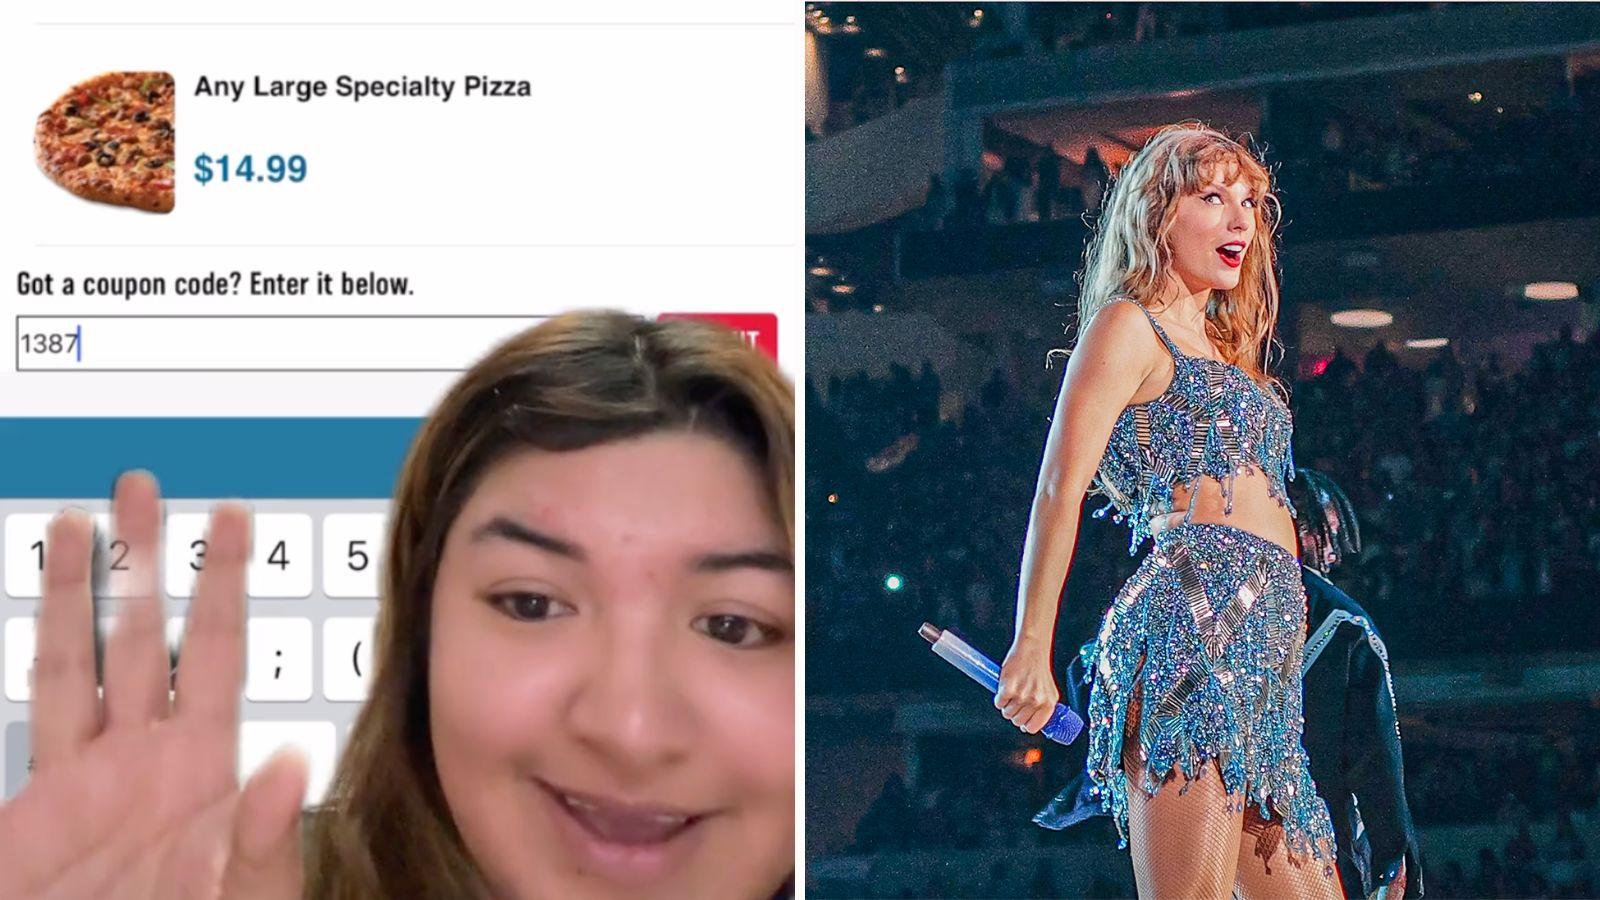 Woman finds Taylor Swift easter egg in Domino's menu